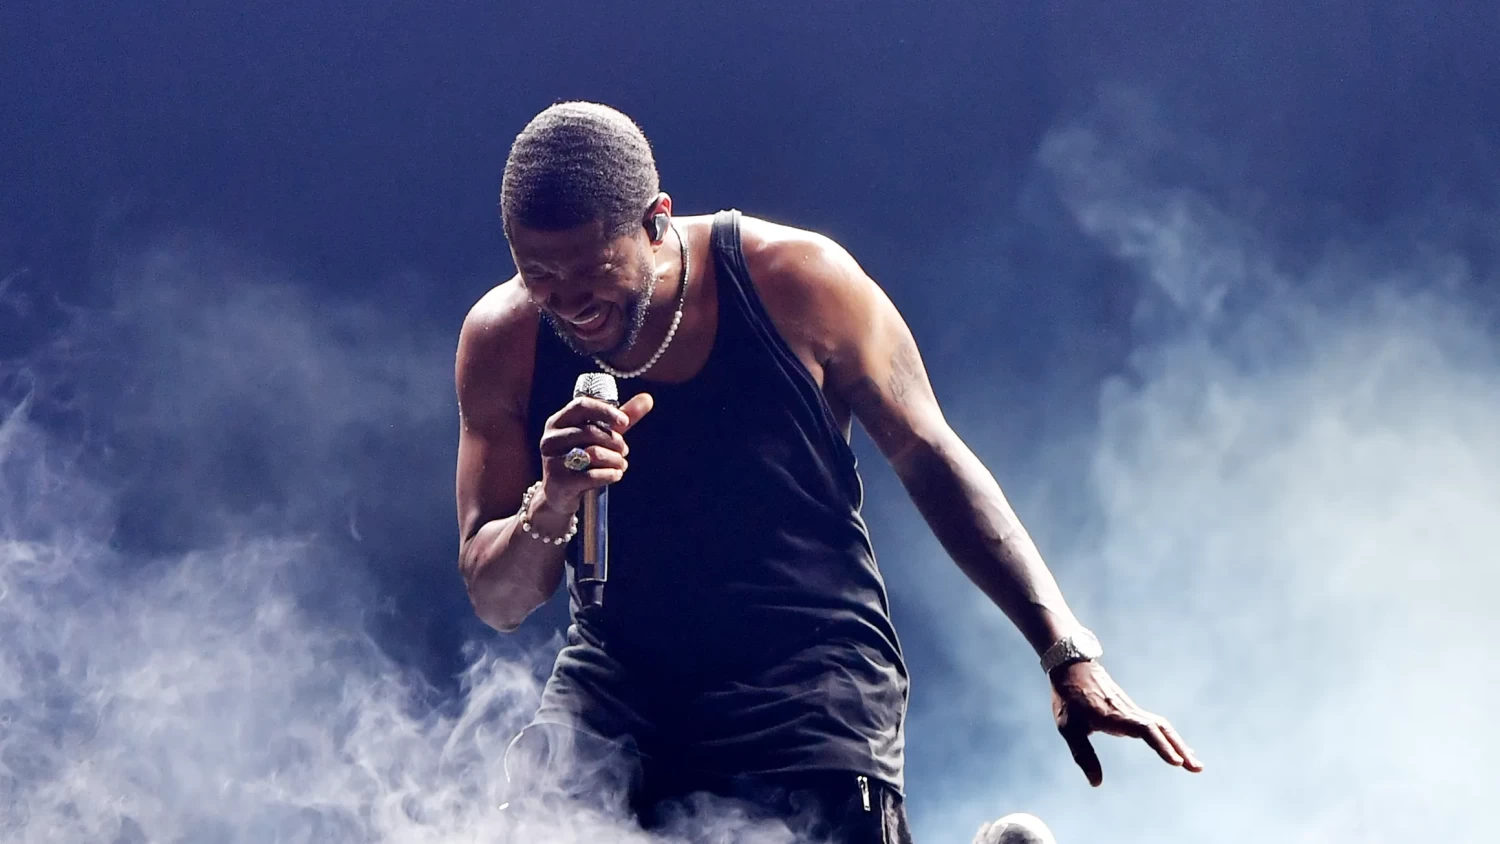 Usher has a Super Bowl-worthy legacy. Why don’t people act like it?